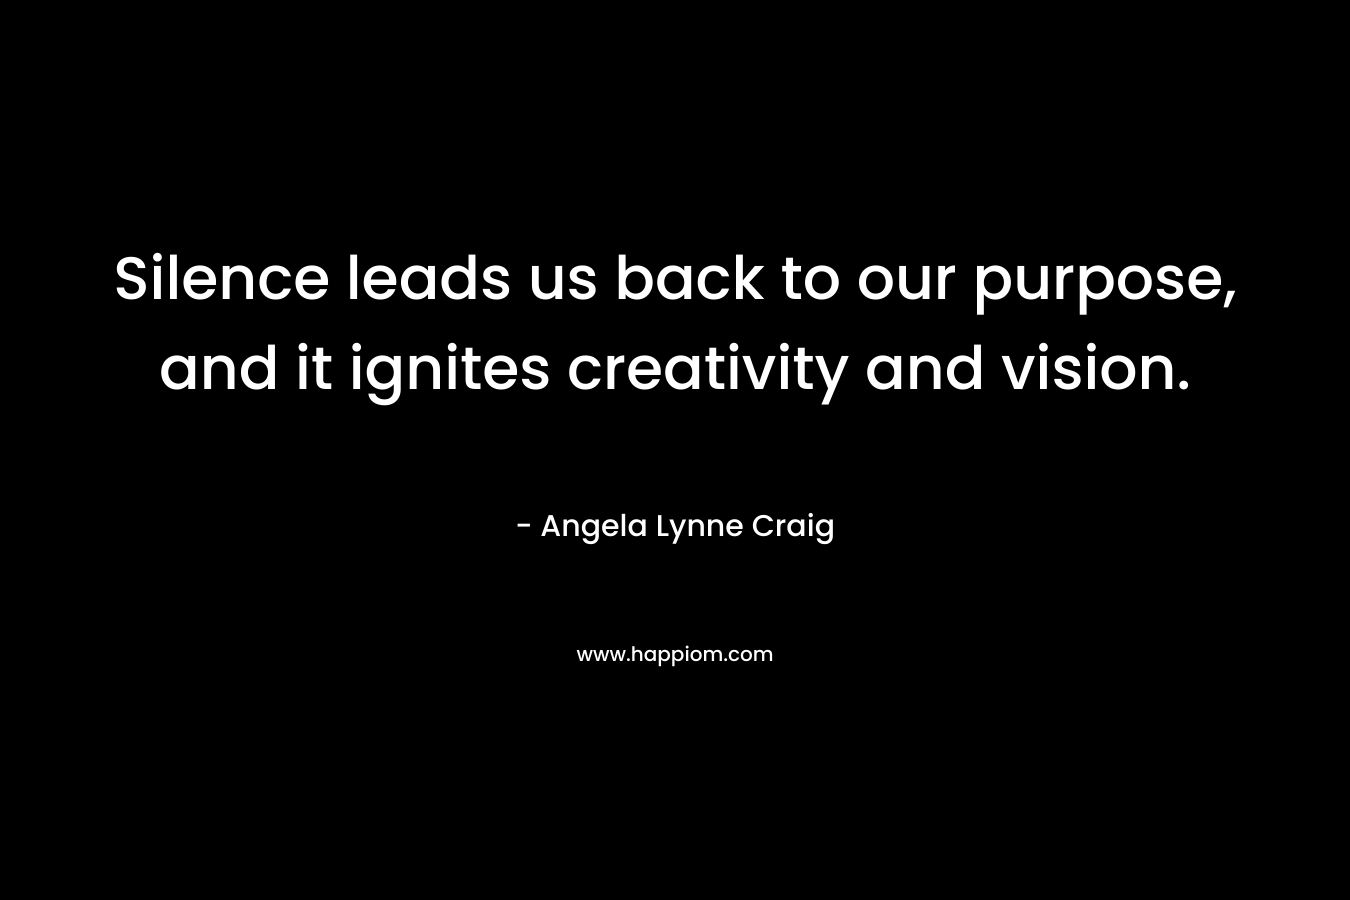 Silence leads us back to our purpose, and it ignites creativity and vision. – Angela Lynne Craig